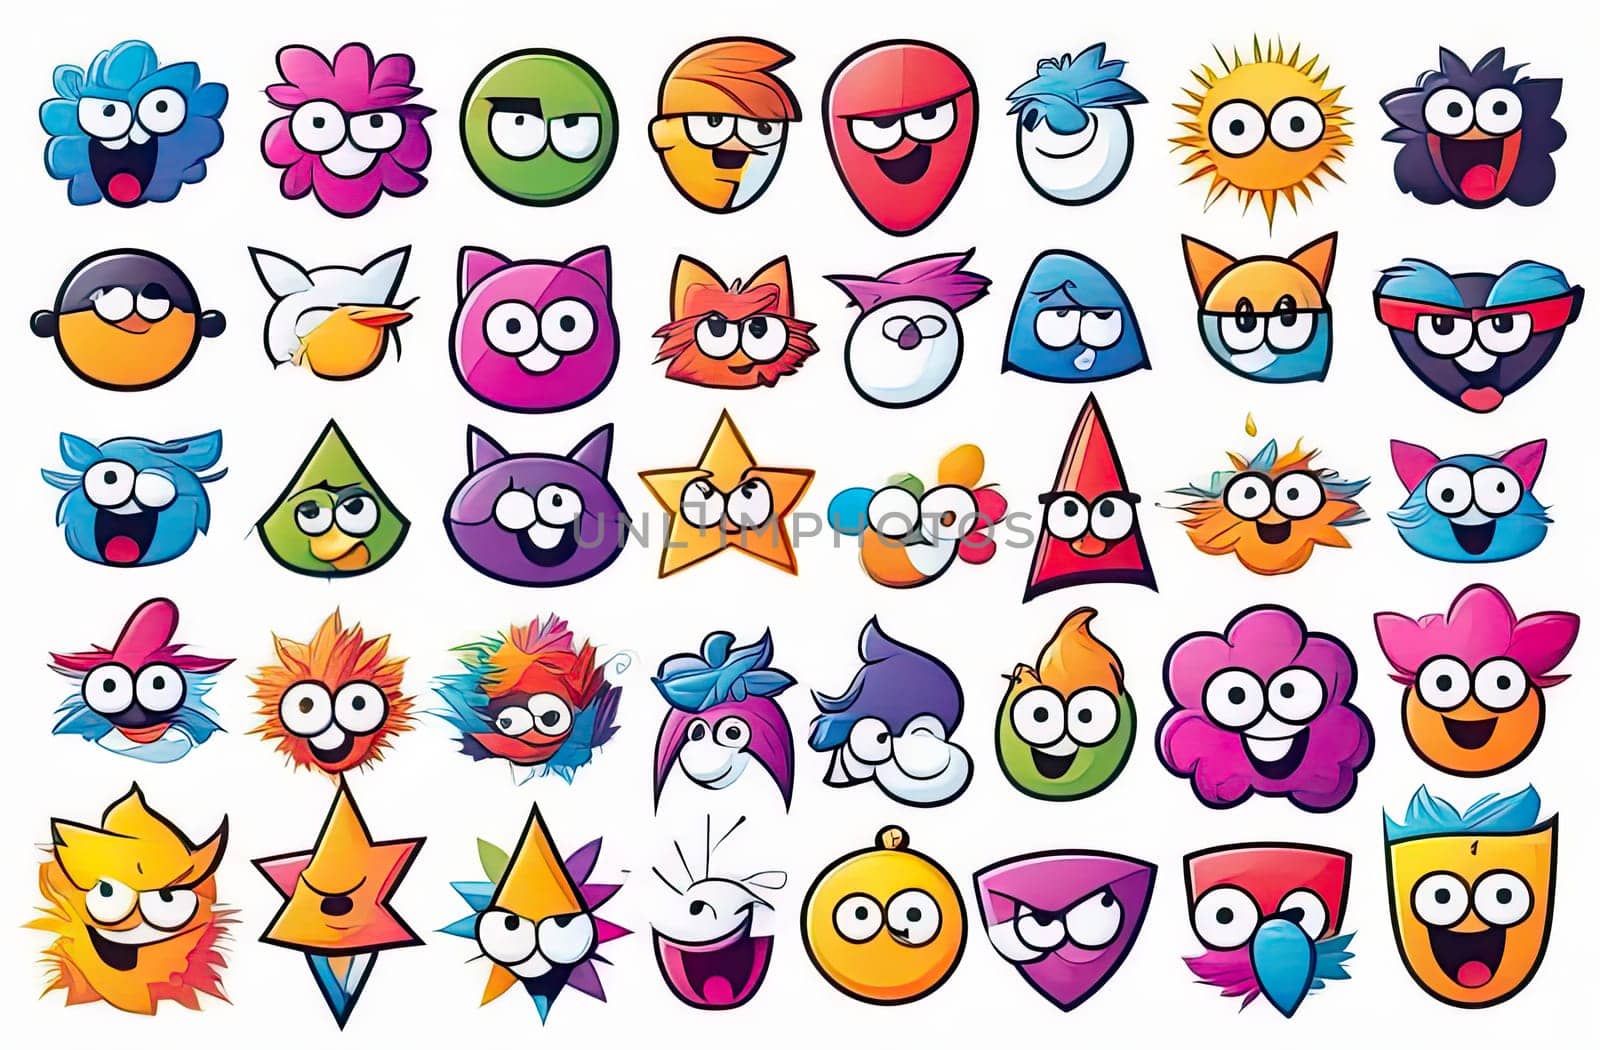 Funny Cartoon Faces Stickers. Colorful crumpled adhesive notes with smiling faces. Seamless by Proxima13